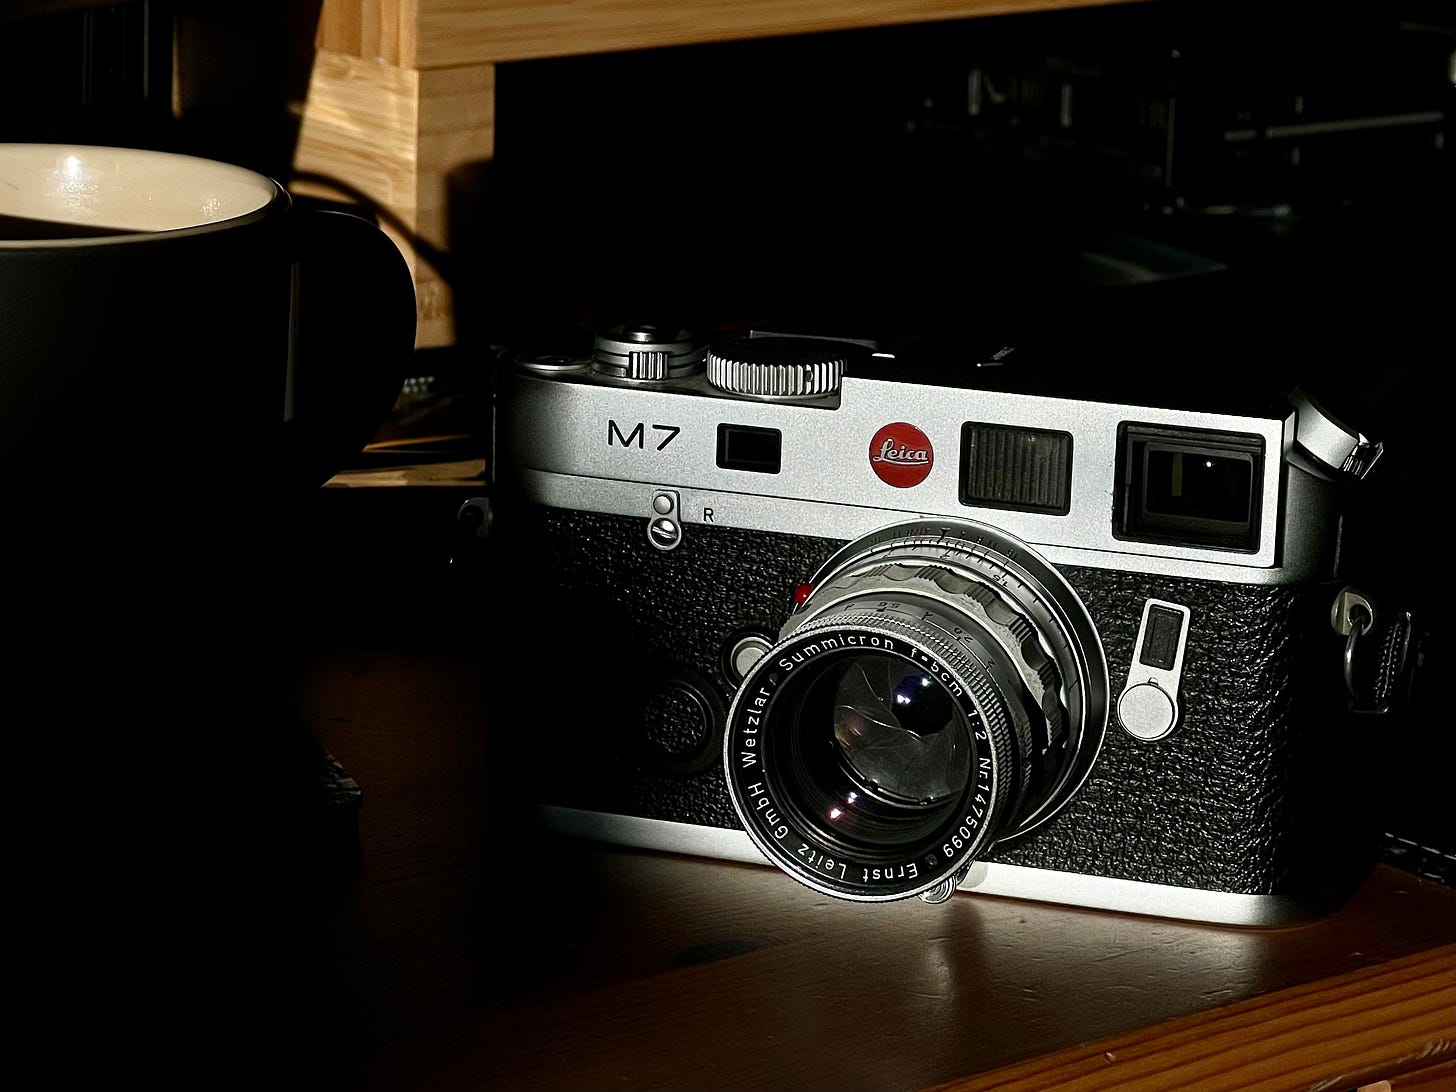 A Leica M7 film camera with a 50mm lens sat on a desk next to a cup of tea.